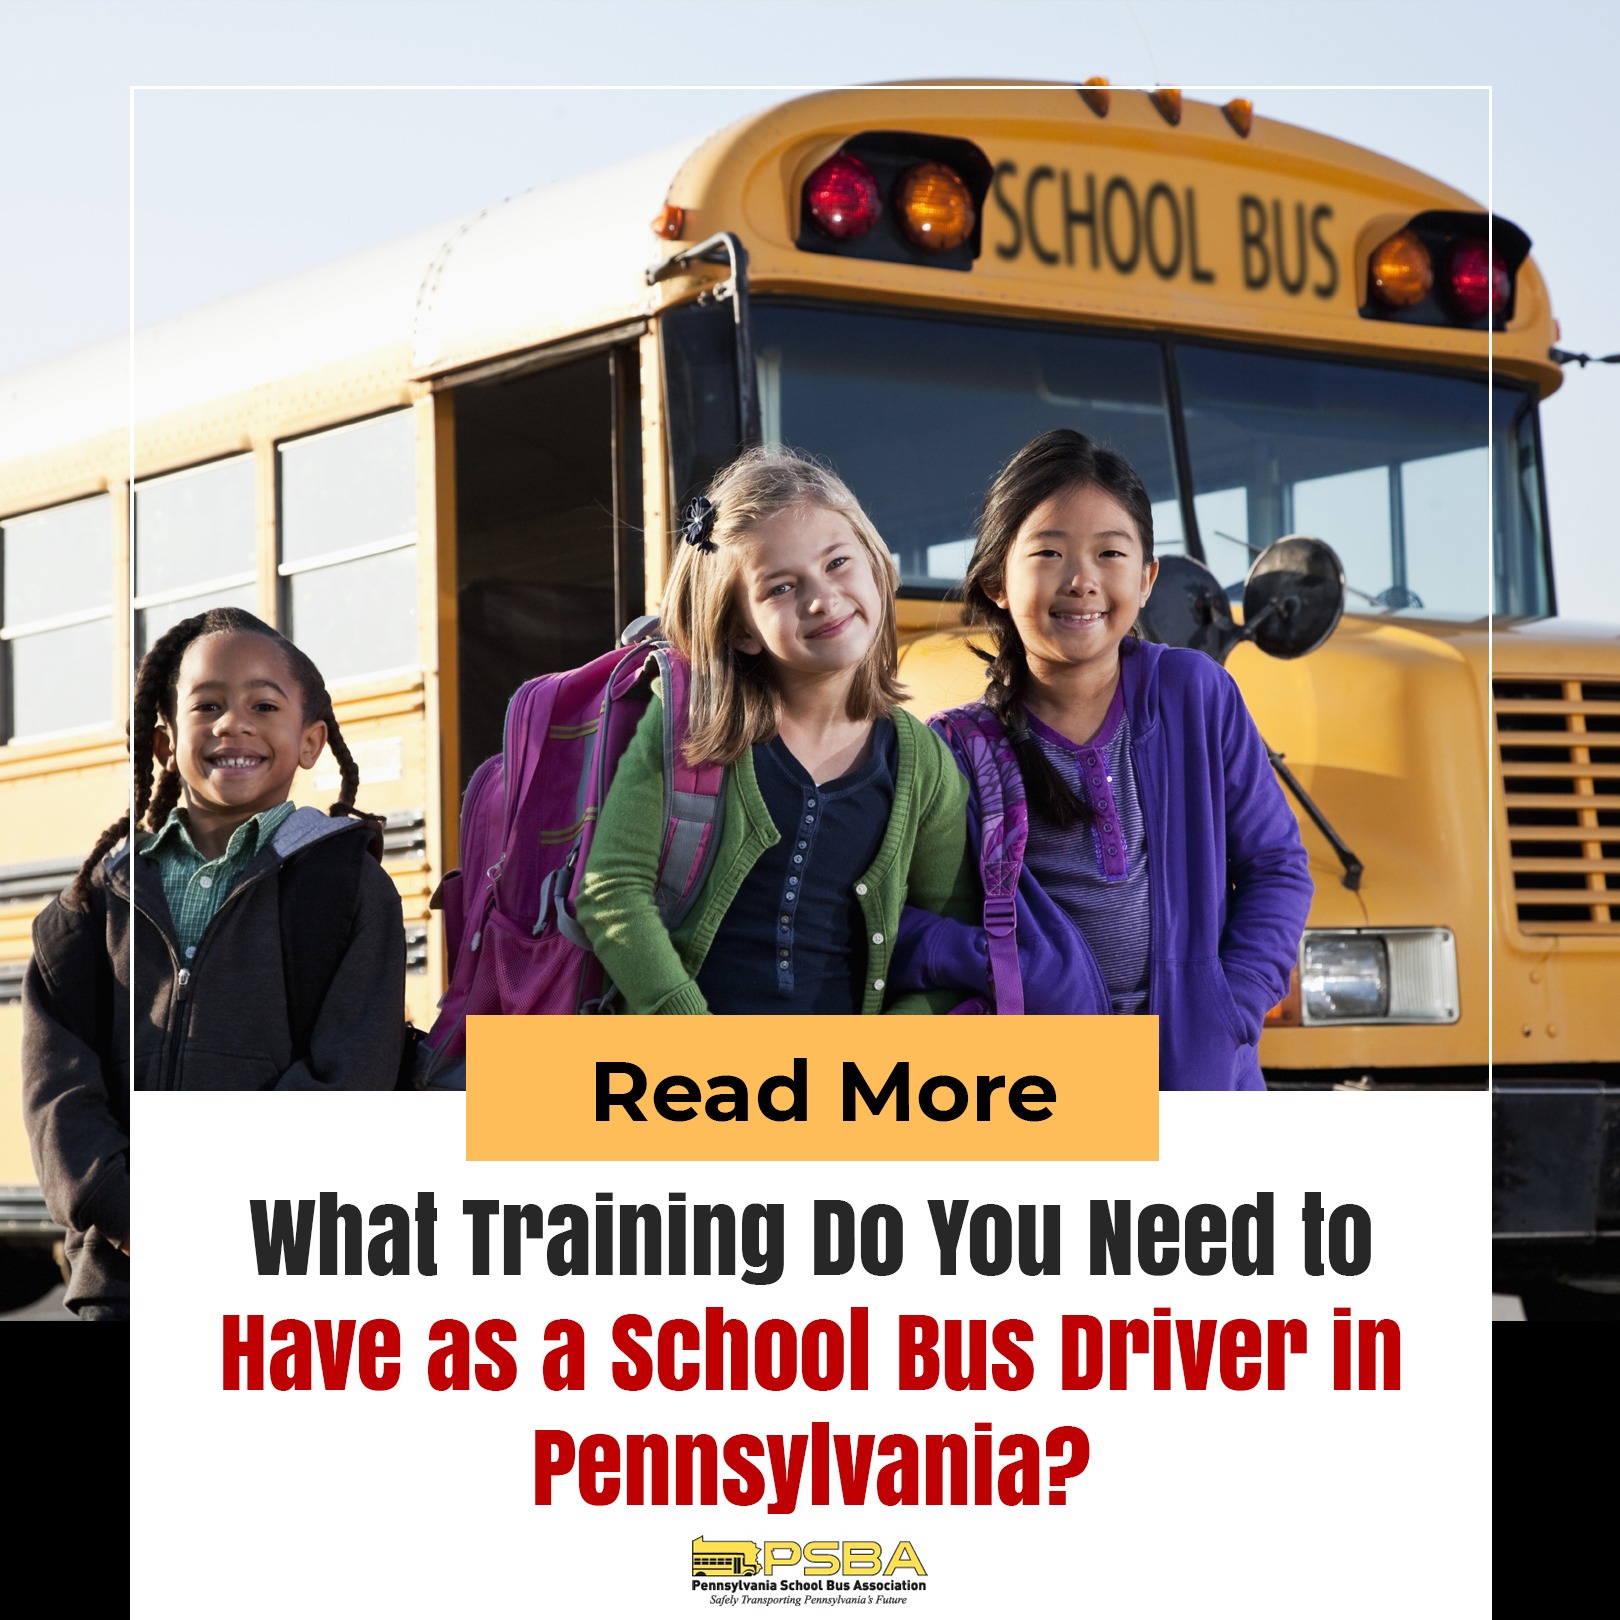 What Training Do You Need to Have as a School Bus Driver in Pennsylvania?